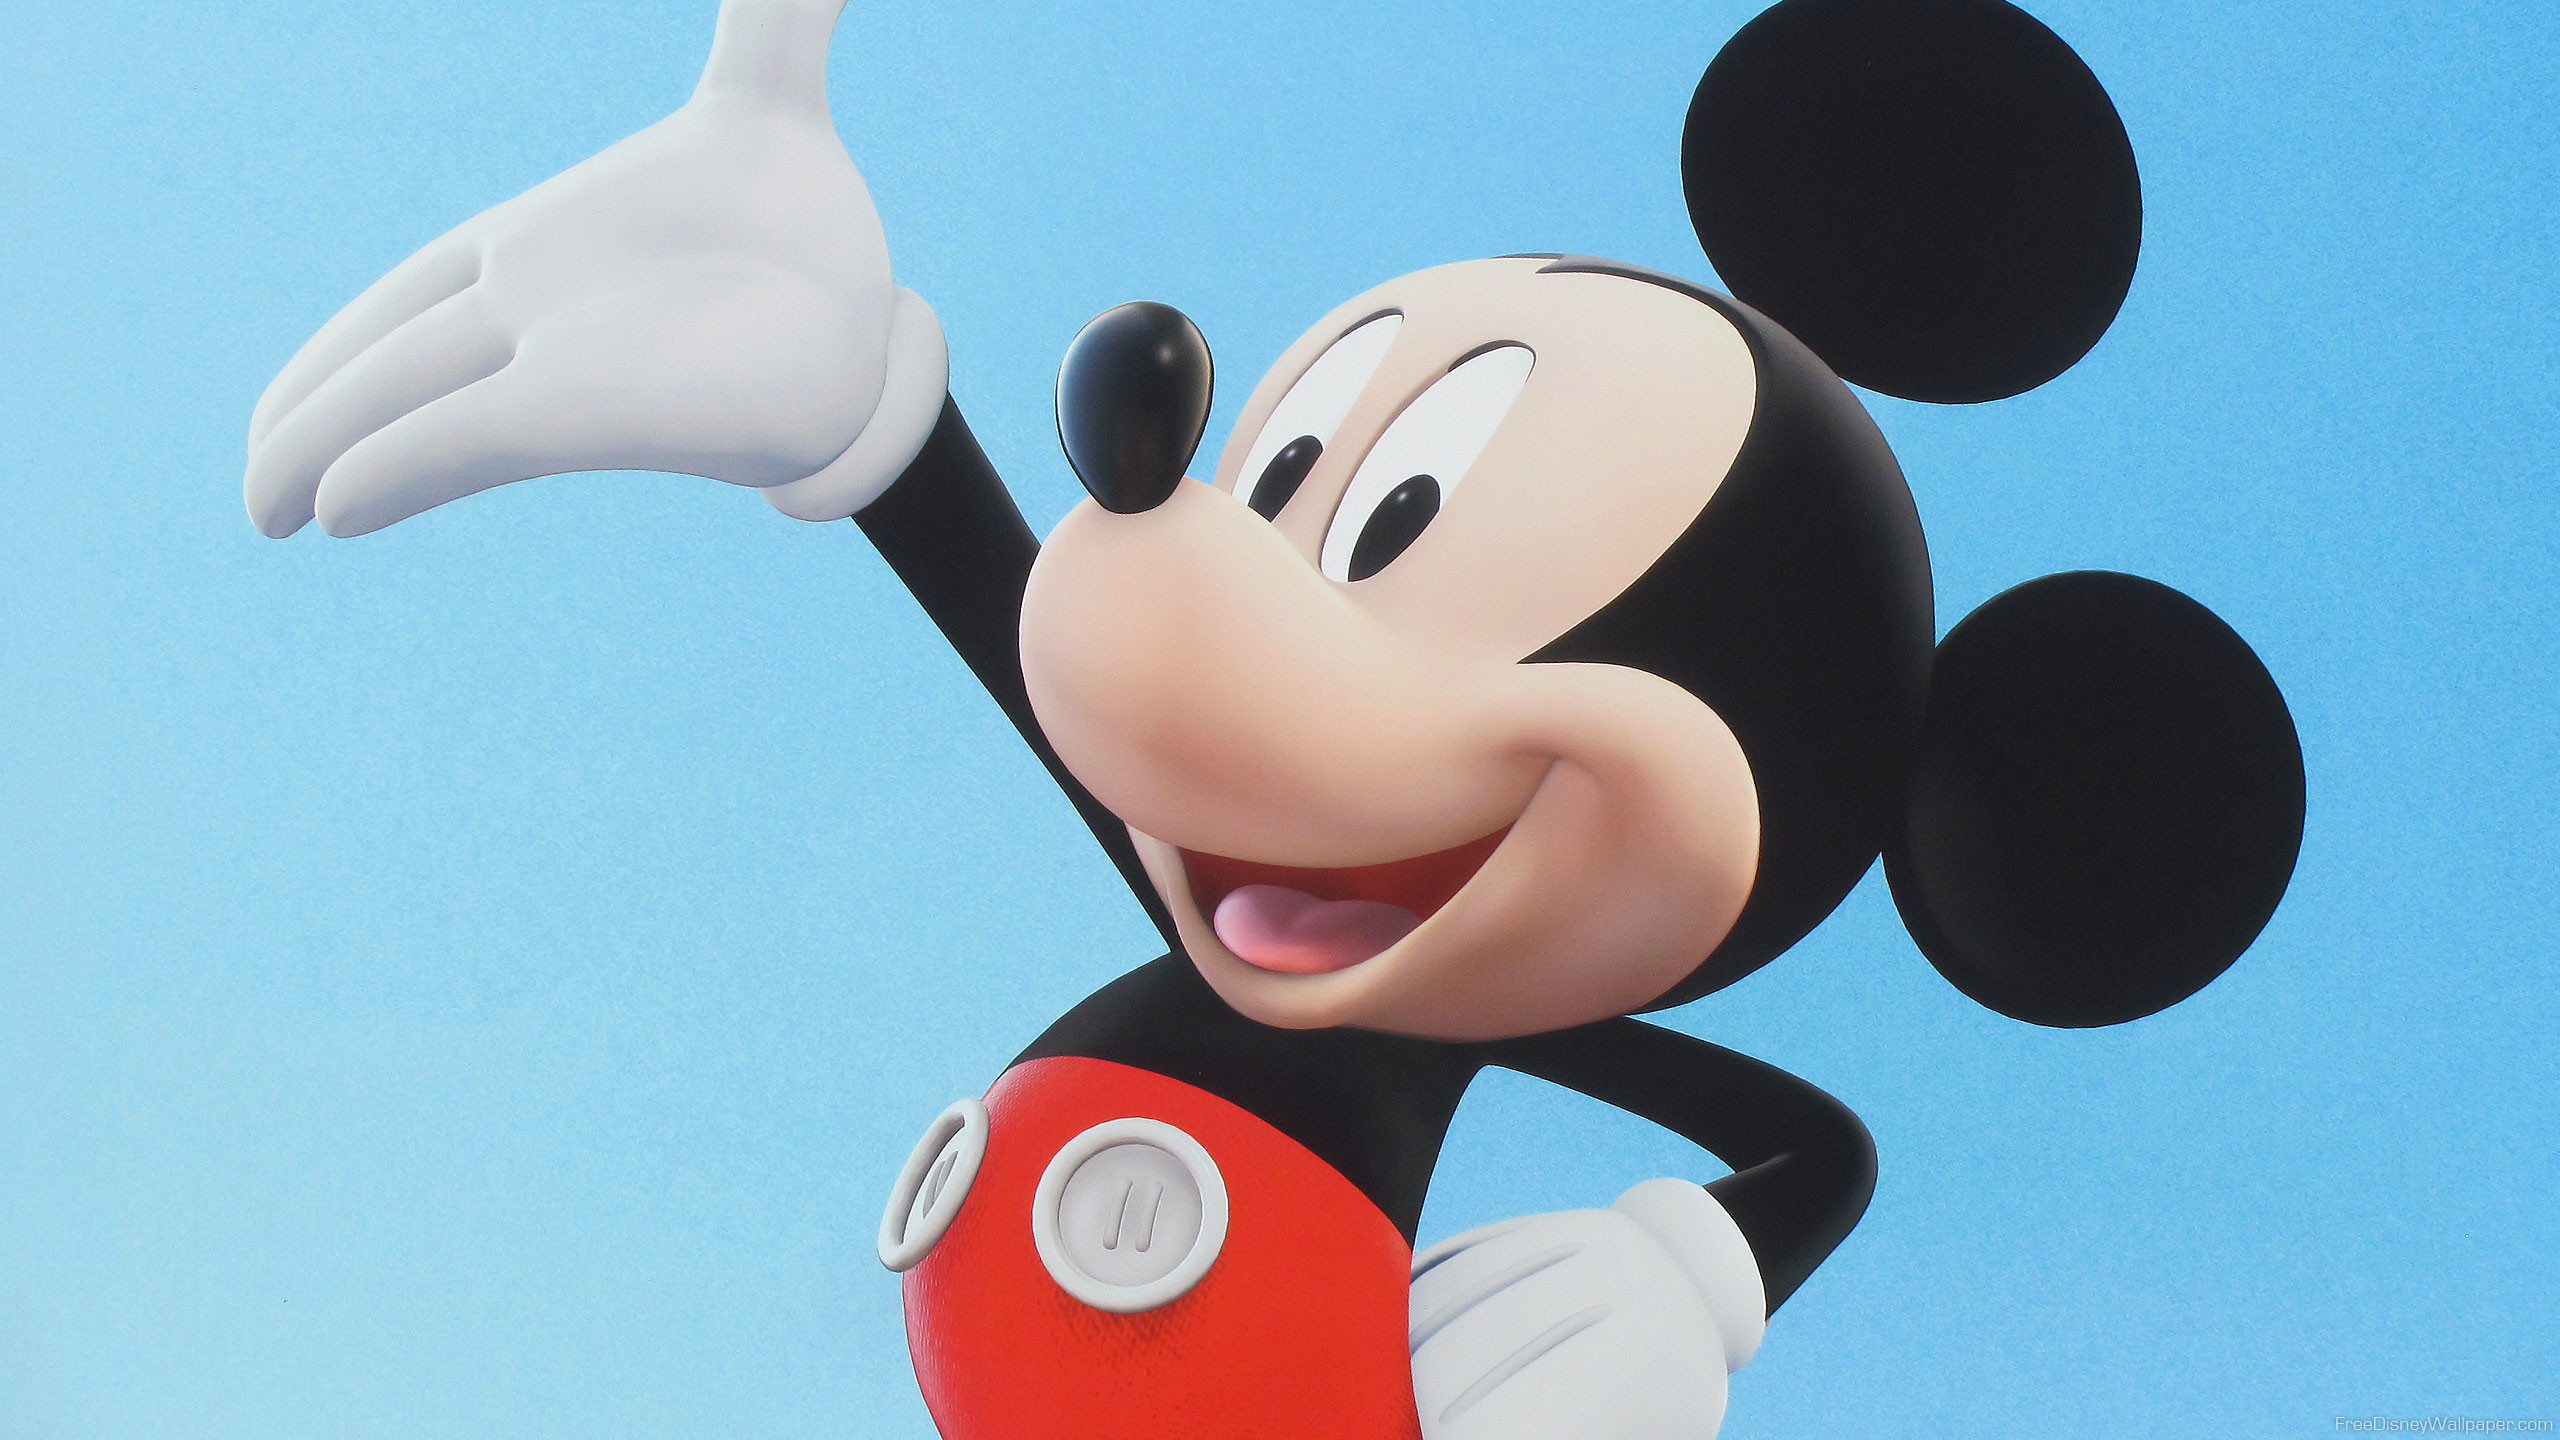 2560x1440 Free Mickey Mouse wallpaper | Mickey Mouse wallpapers